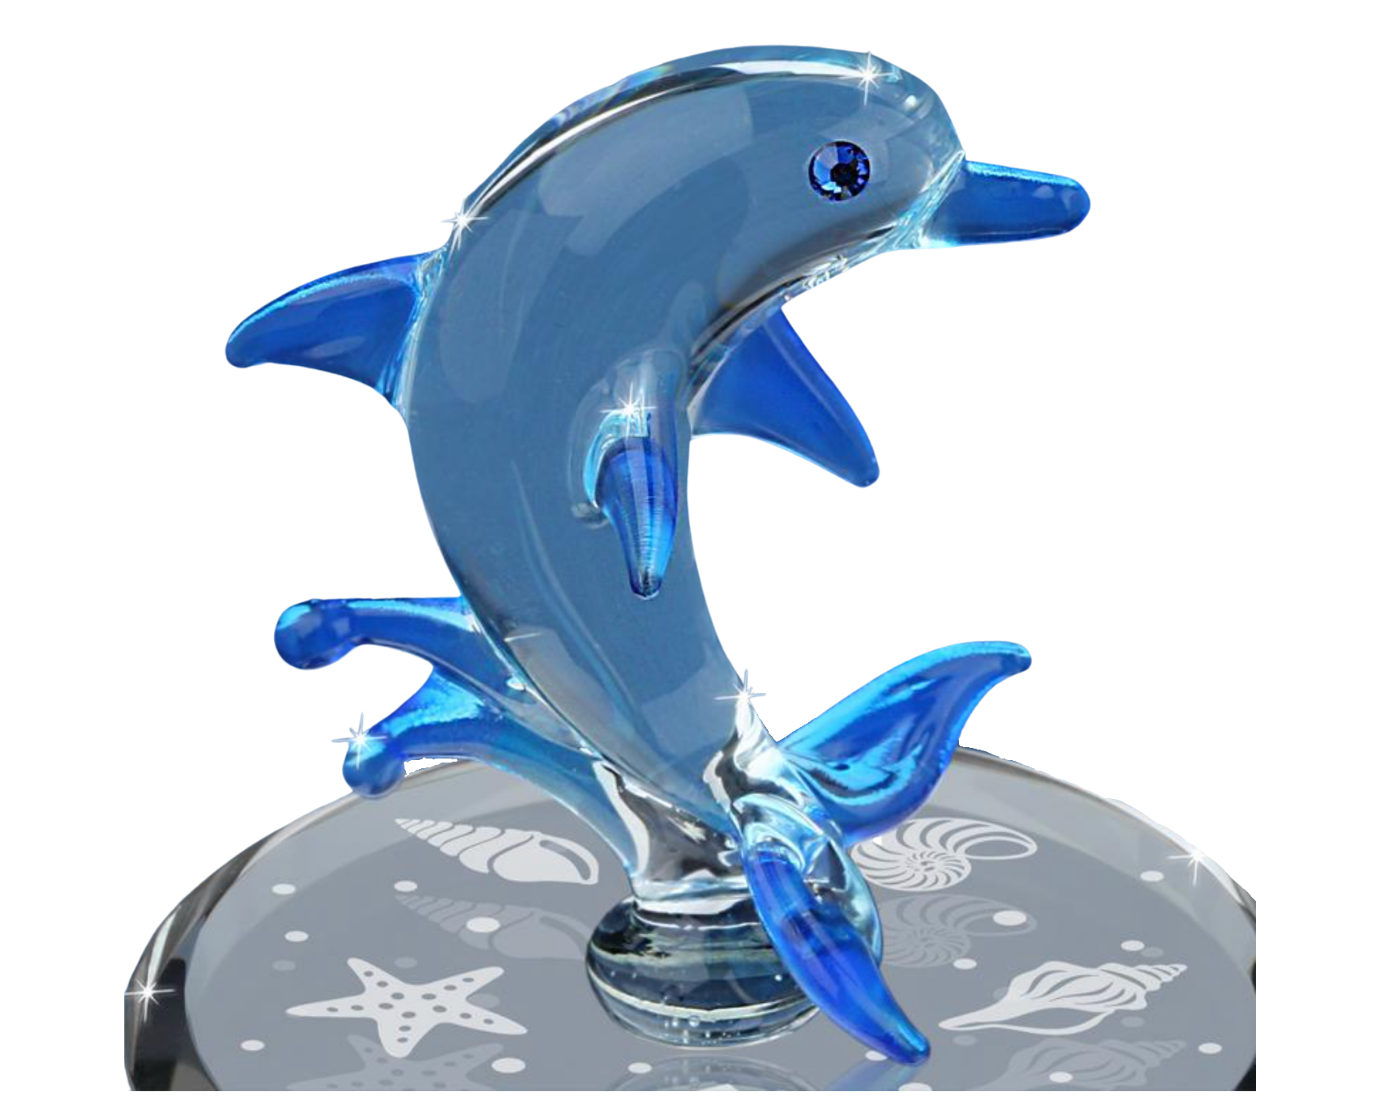 Dolphin Decor Statue Marine Life Home Decor Figurine Holiday Wedding Gifts for Him/Her